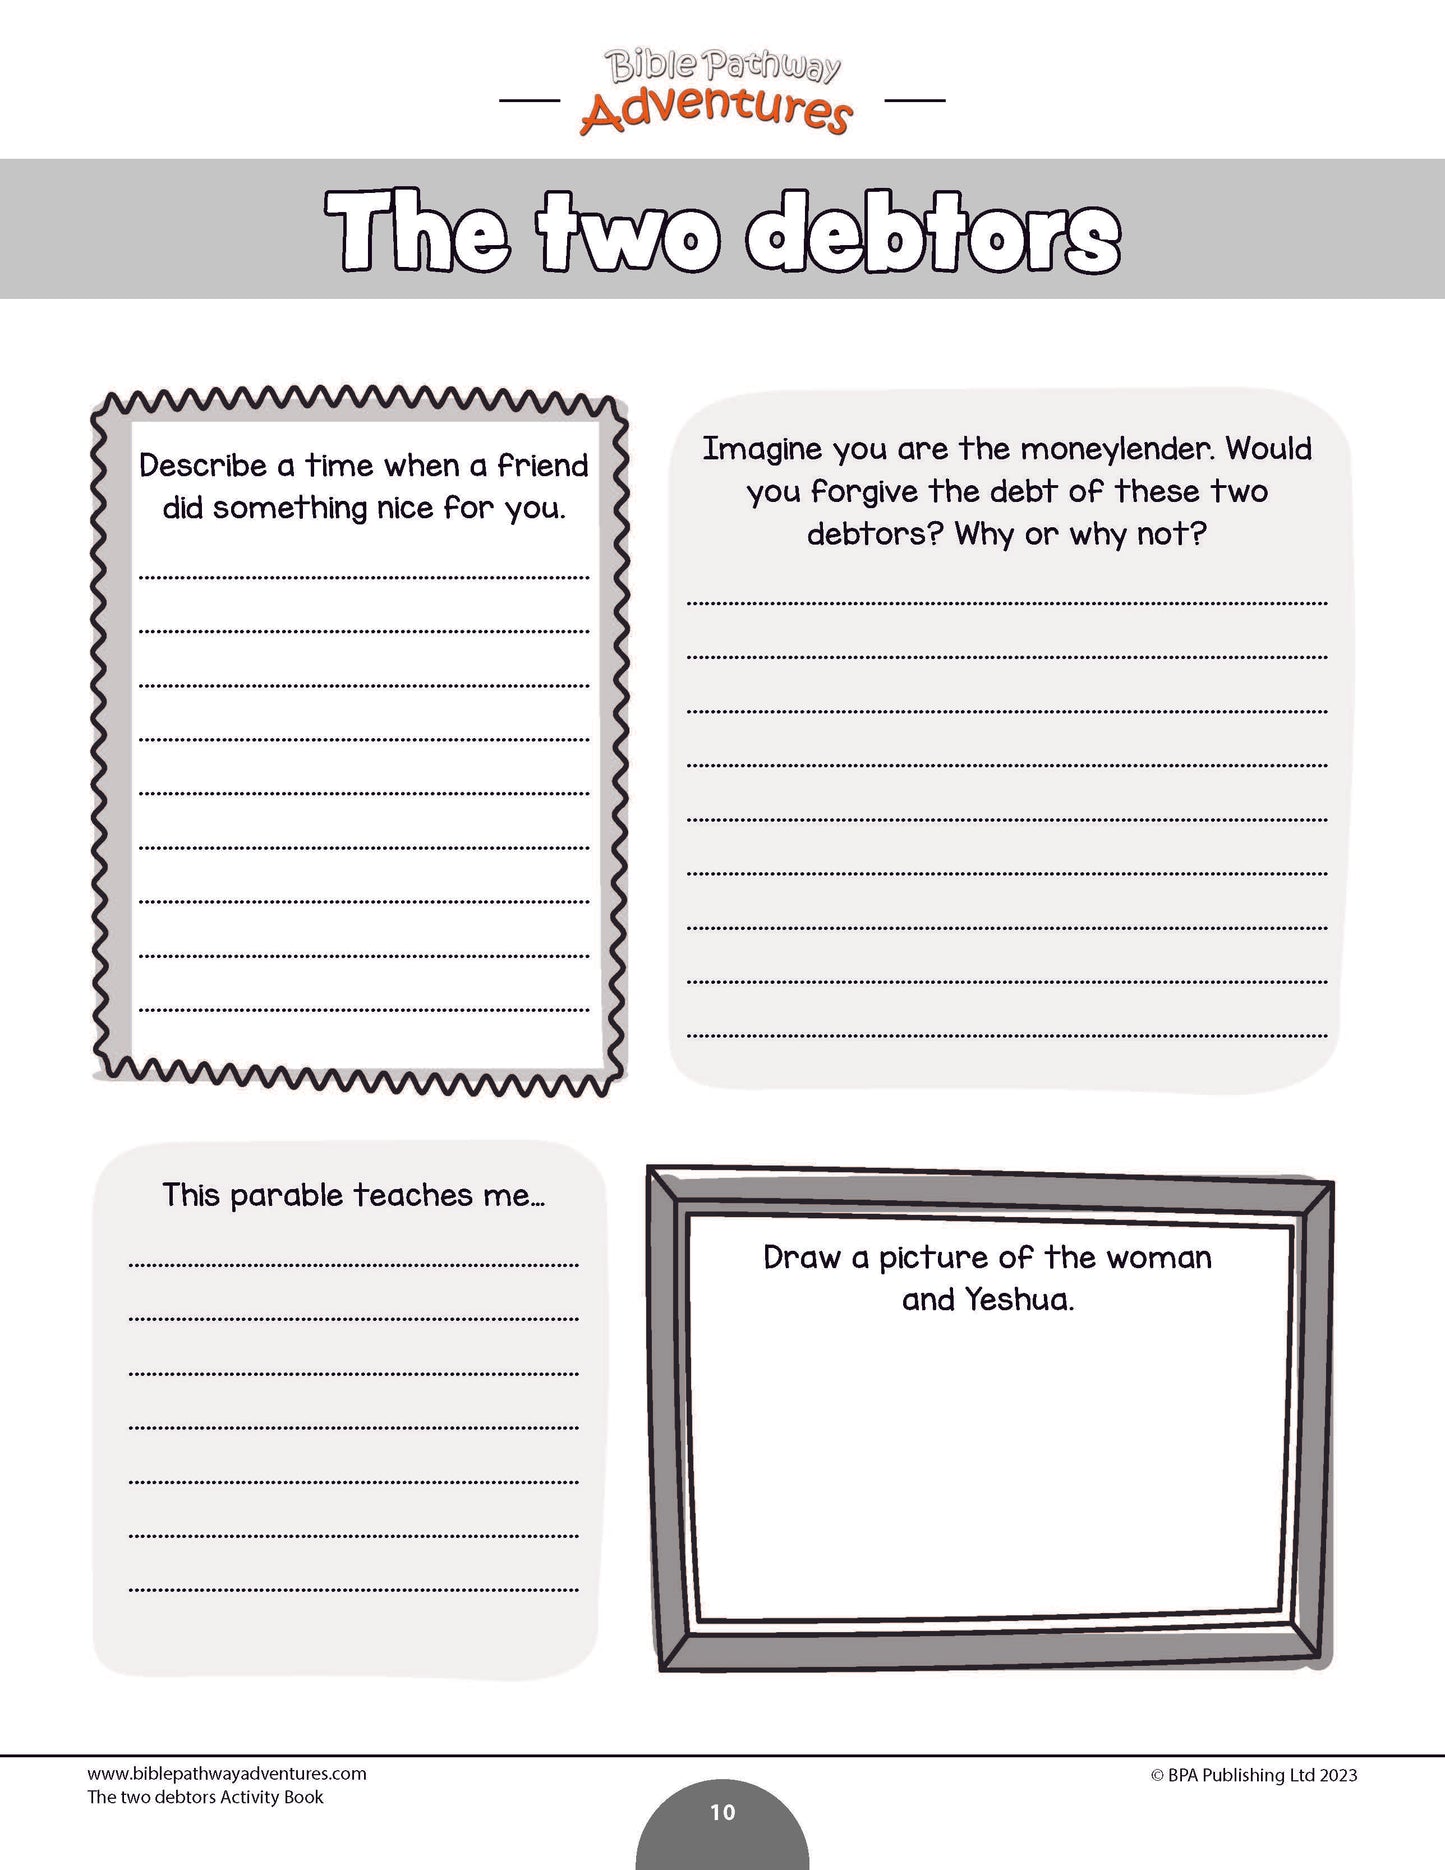 Parable of the Two Debtors Activity Book